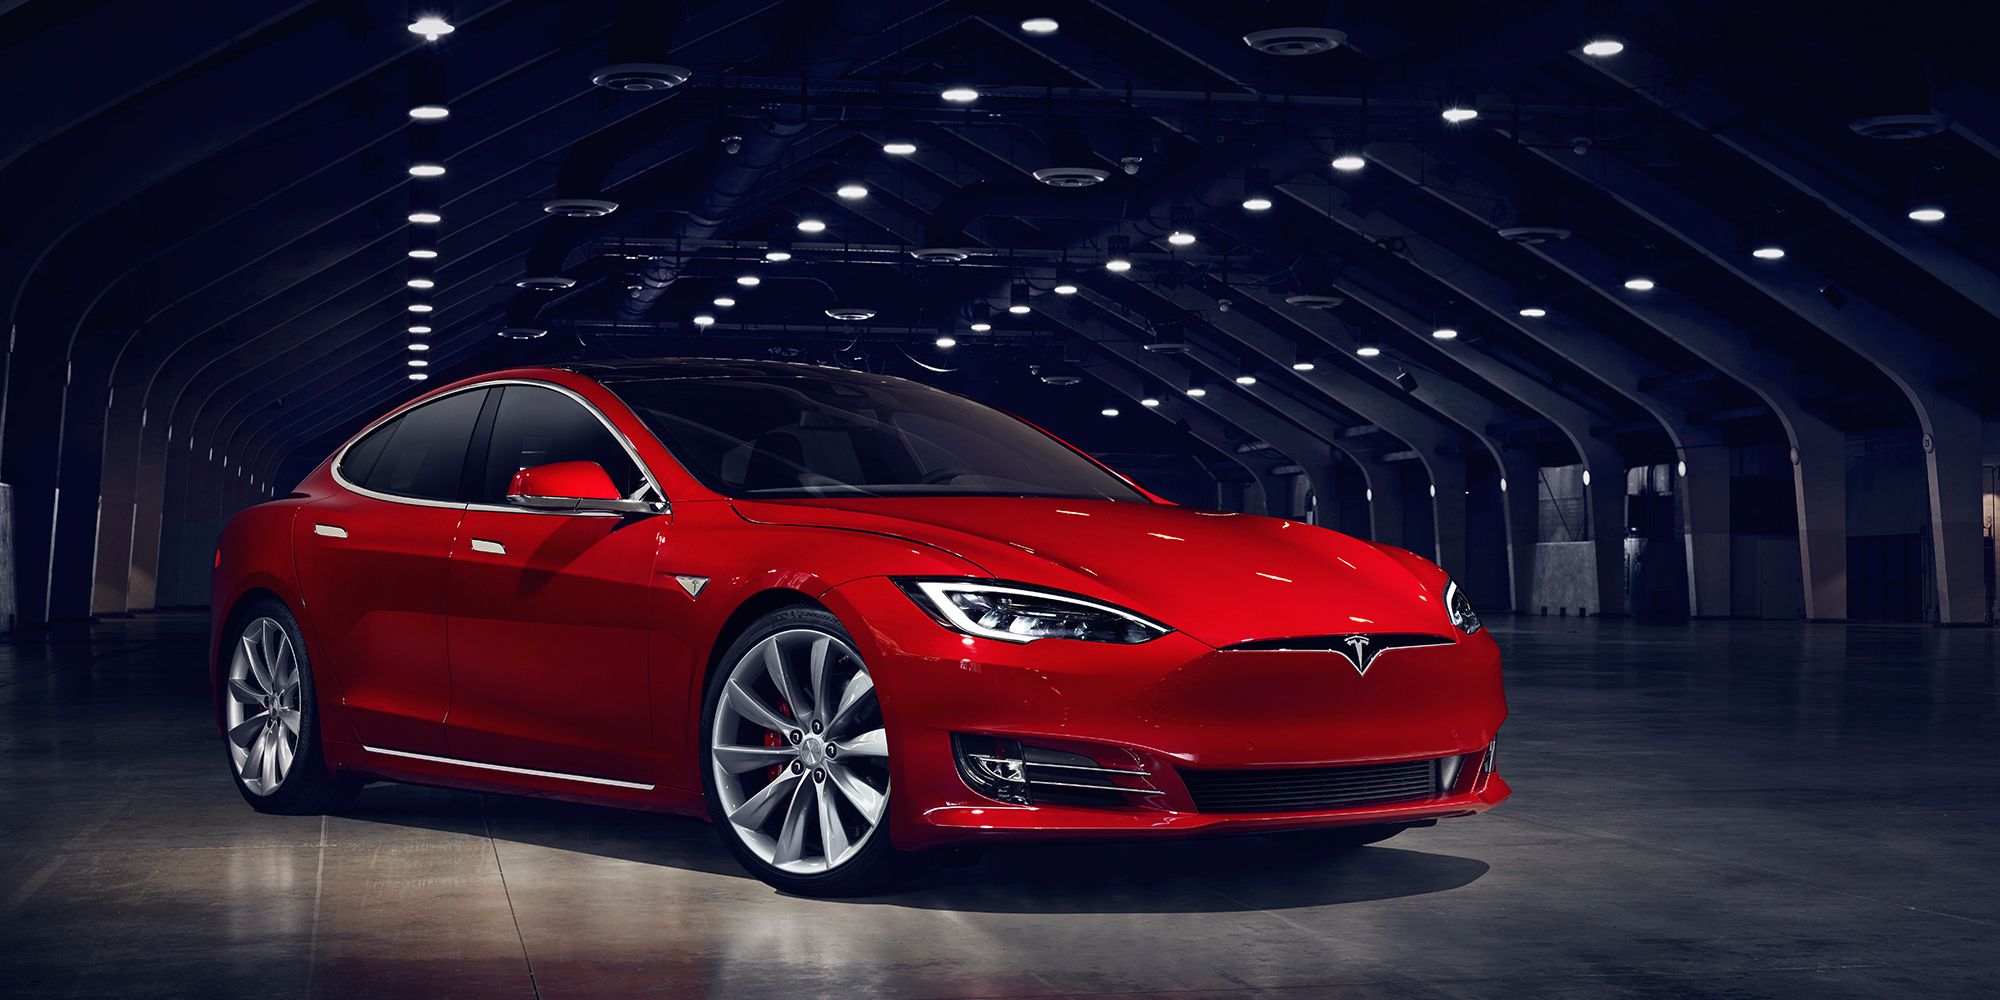 Tesla Model S 70 Is Really a S 75 Upgrade After Purchase